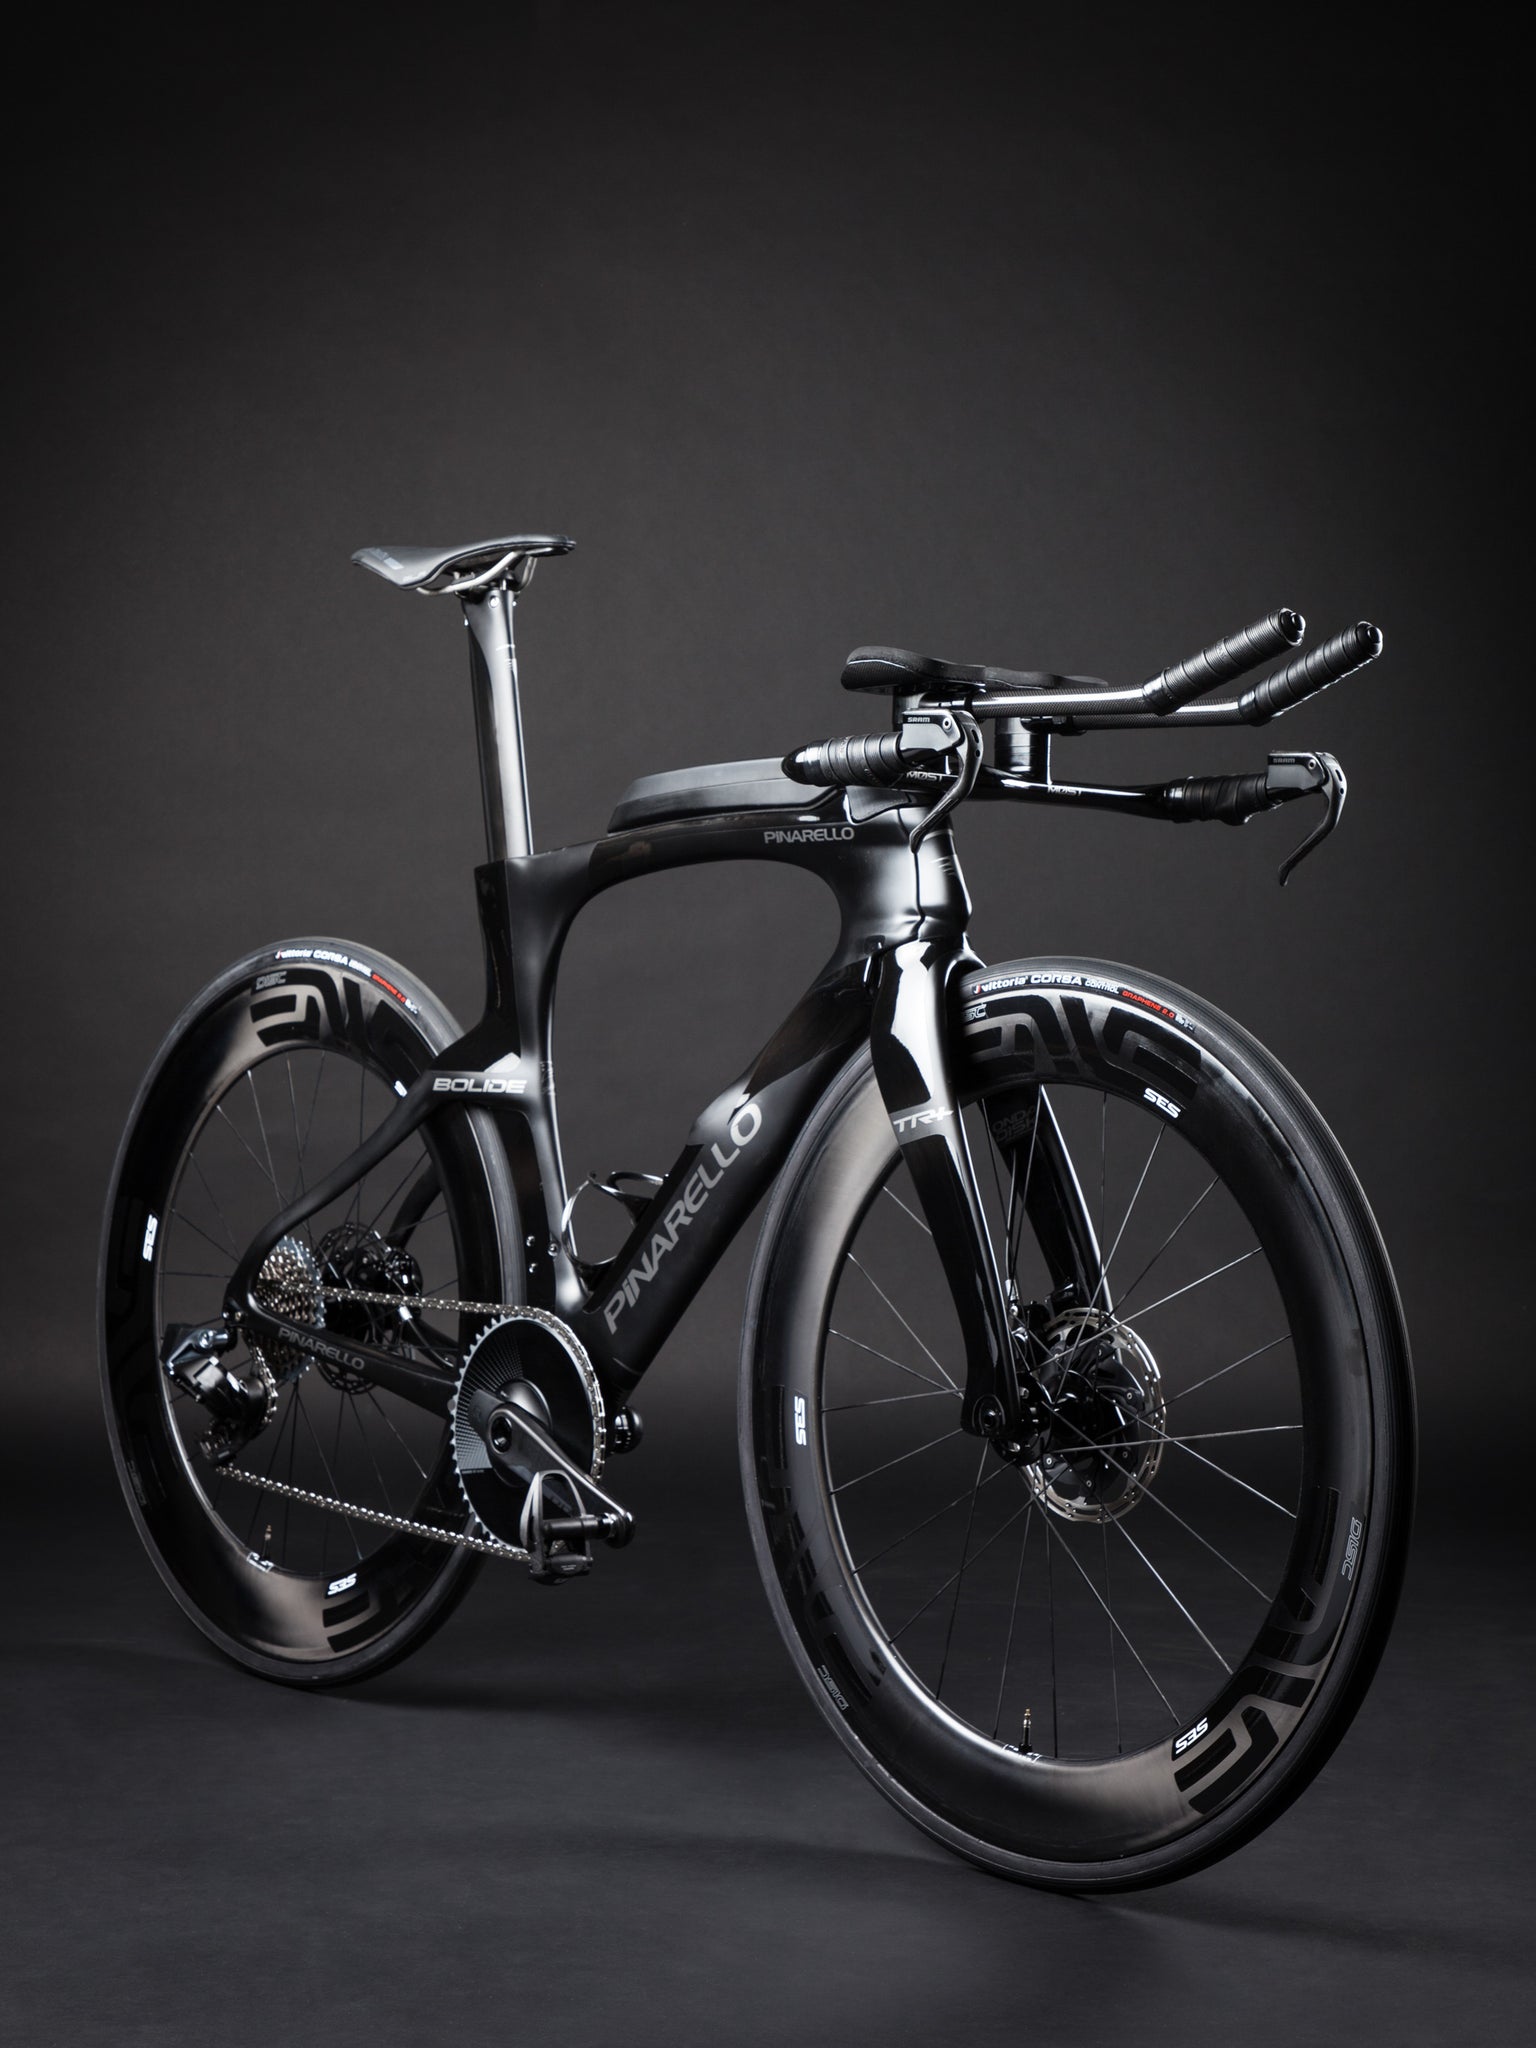 A Blacked Out Pinarello Bolide Gallery front angle full bike